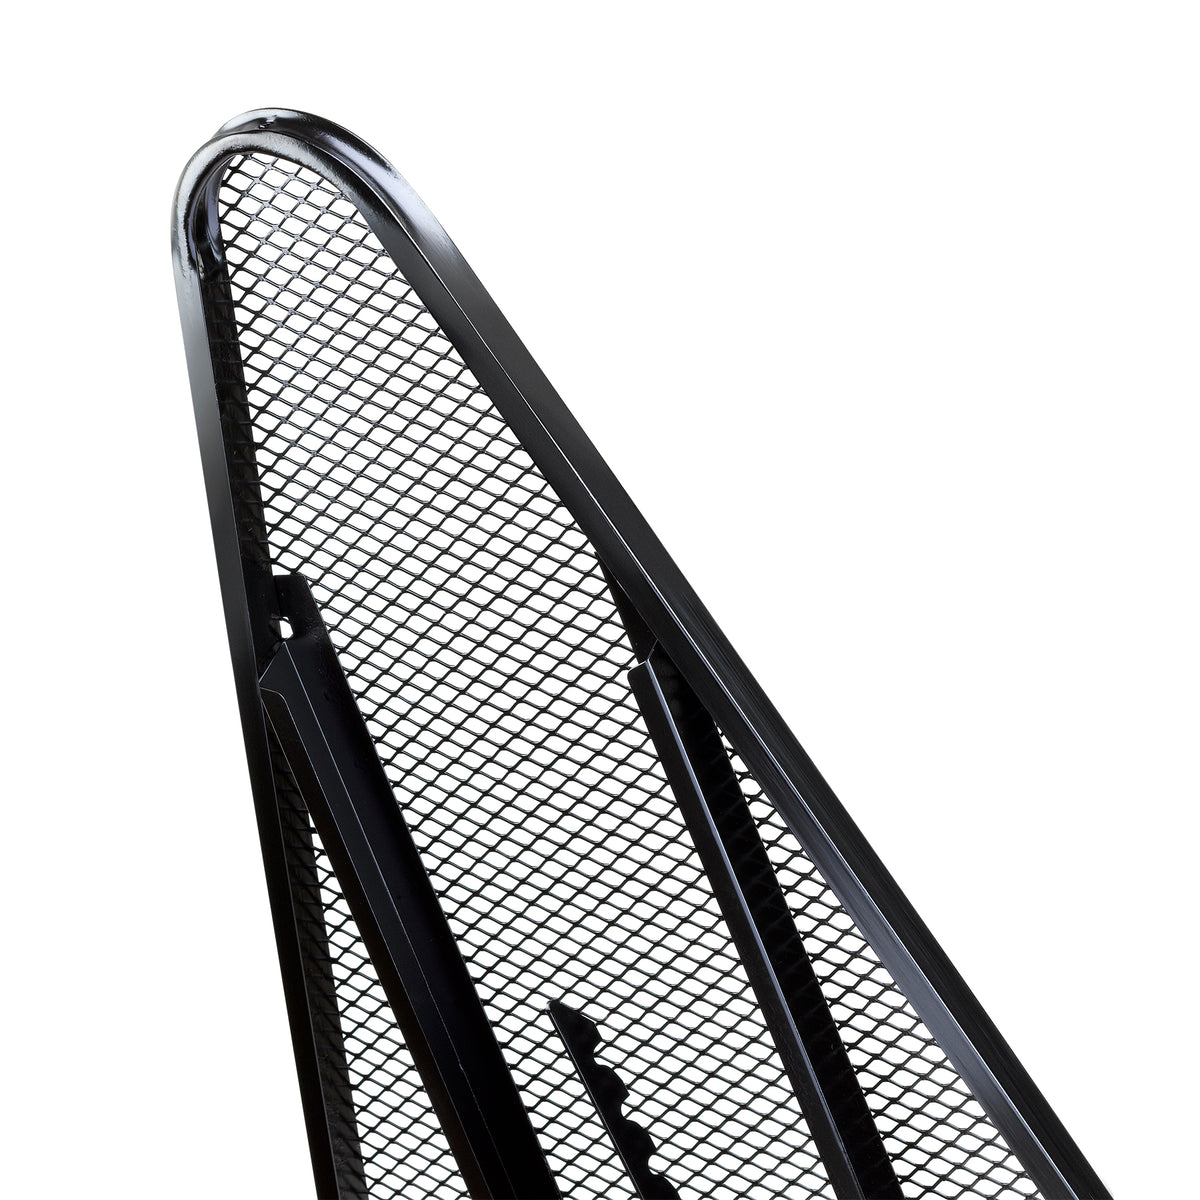 The Quilters Ironing Board! 320LB 2-in-1 Premium Home Ironing Board W/ Verafoam Cover Set